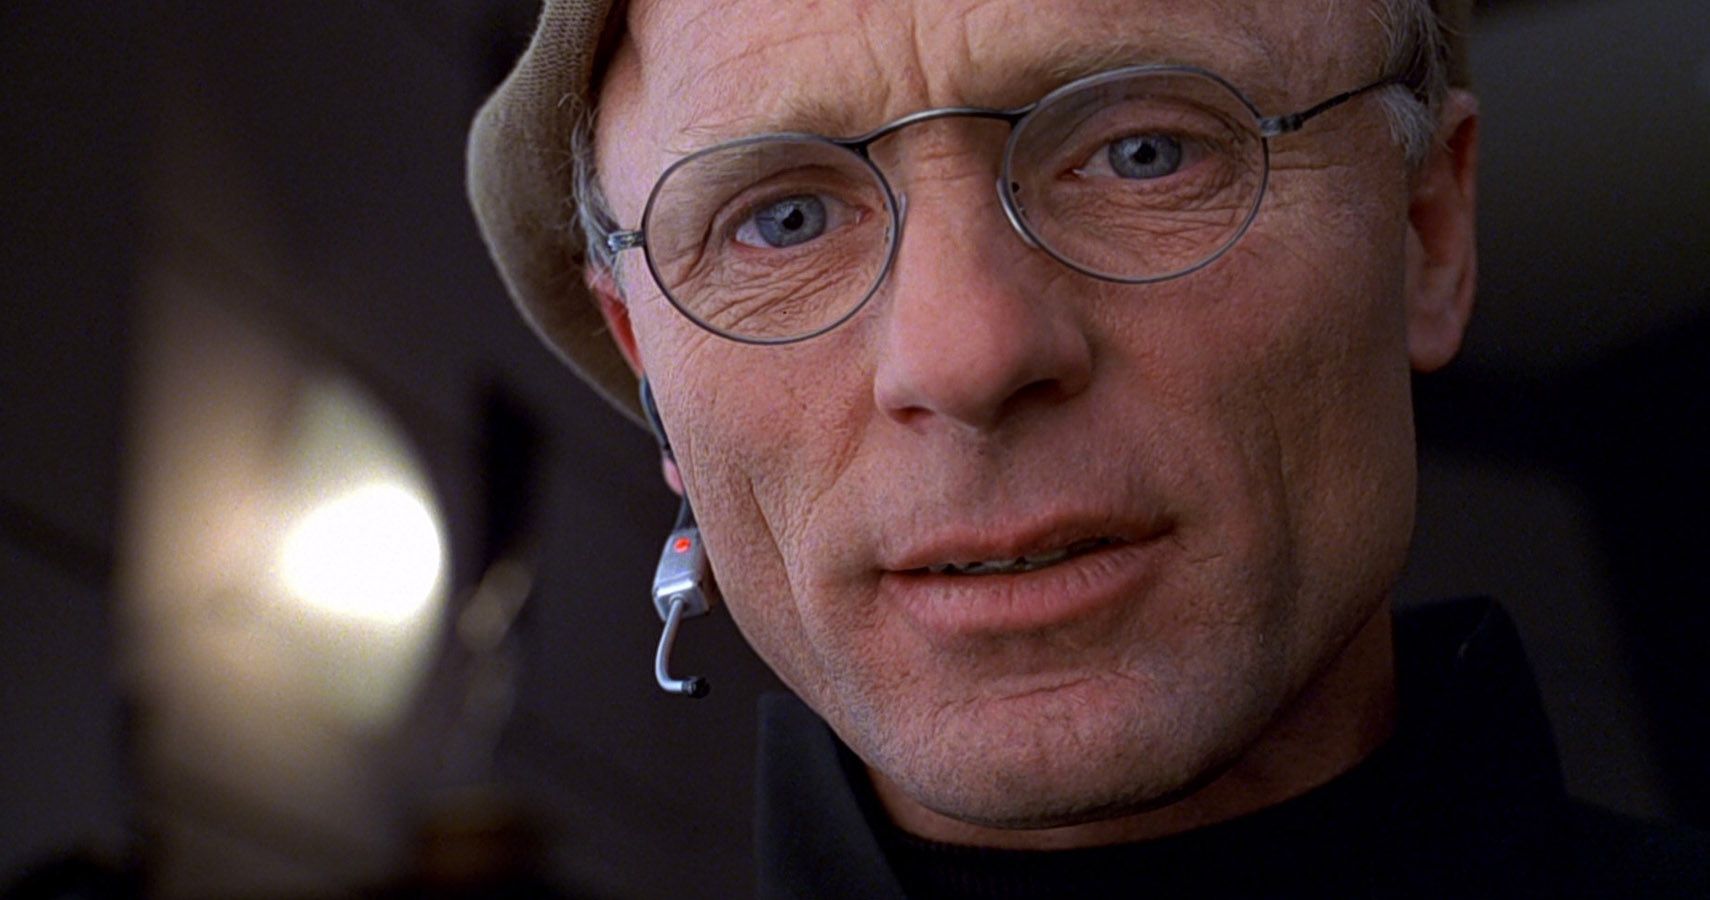 20 Best Quotes From The Truman Show | Screen Rant